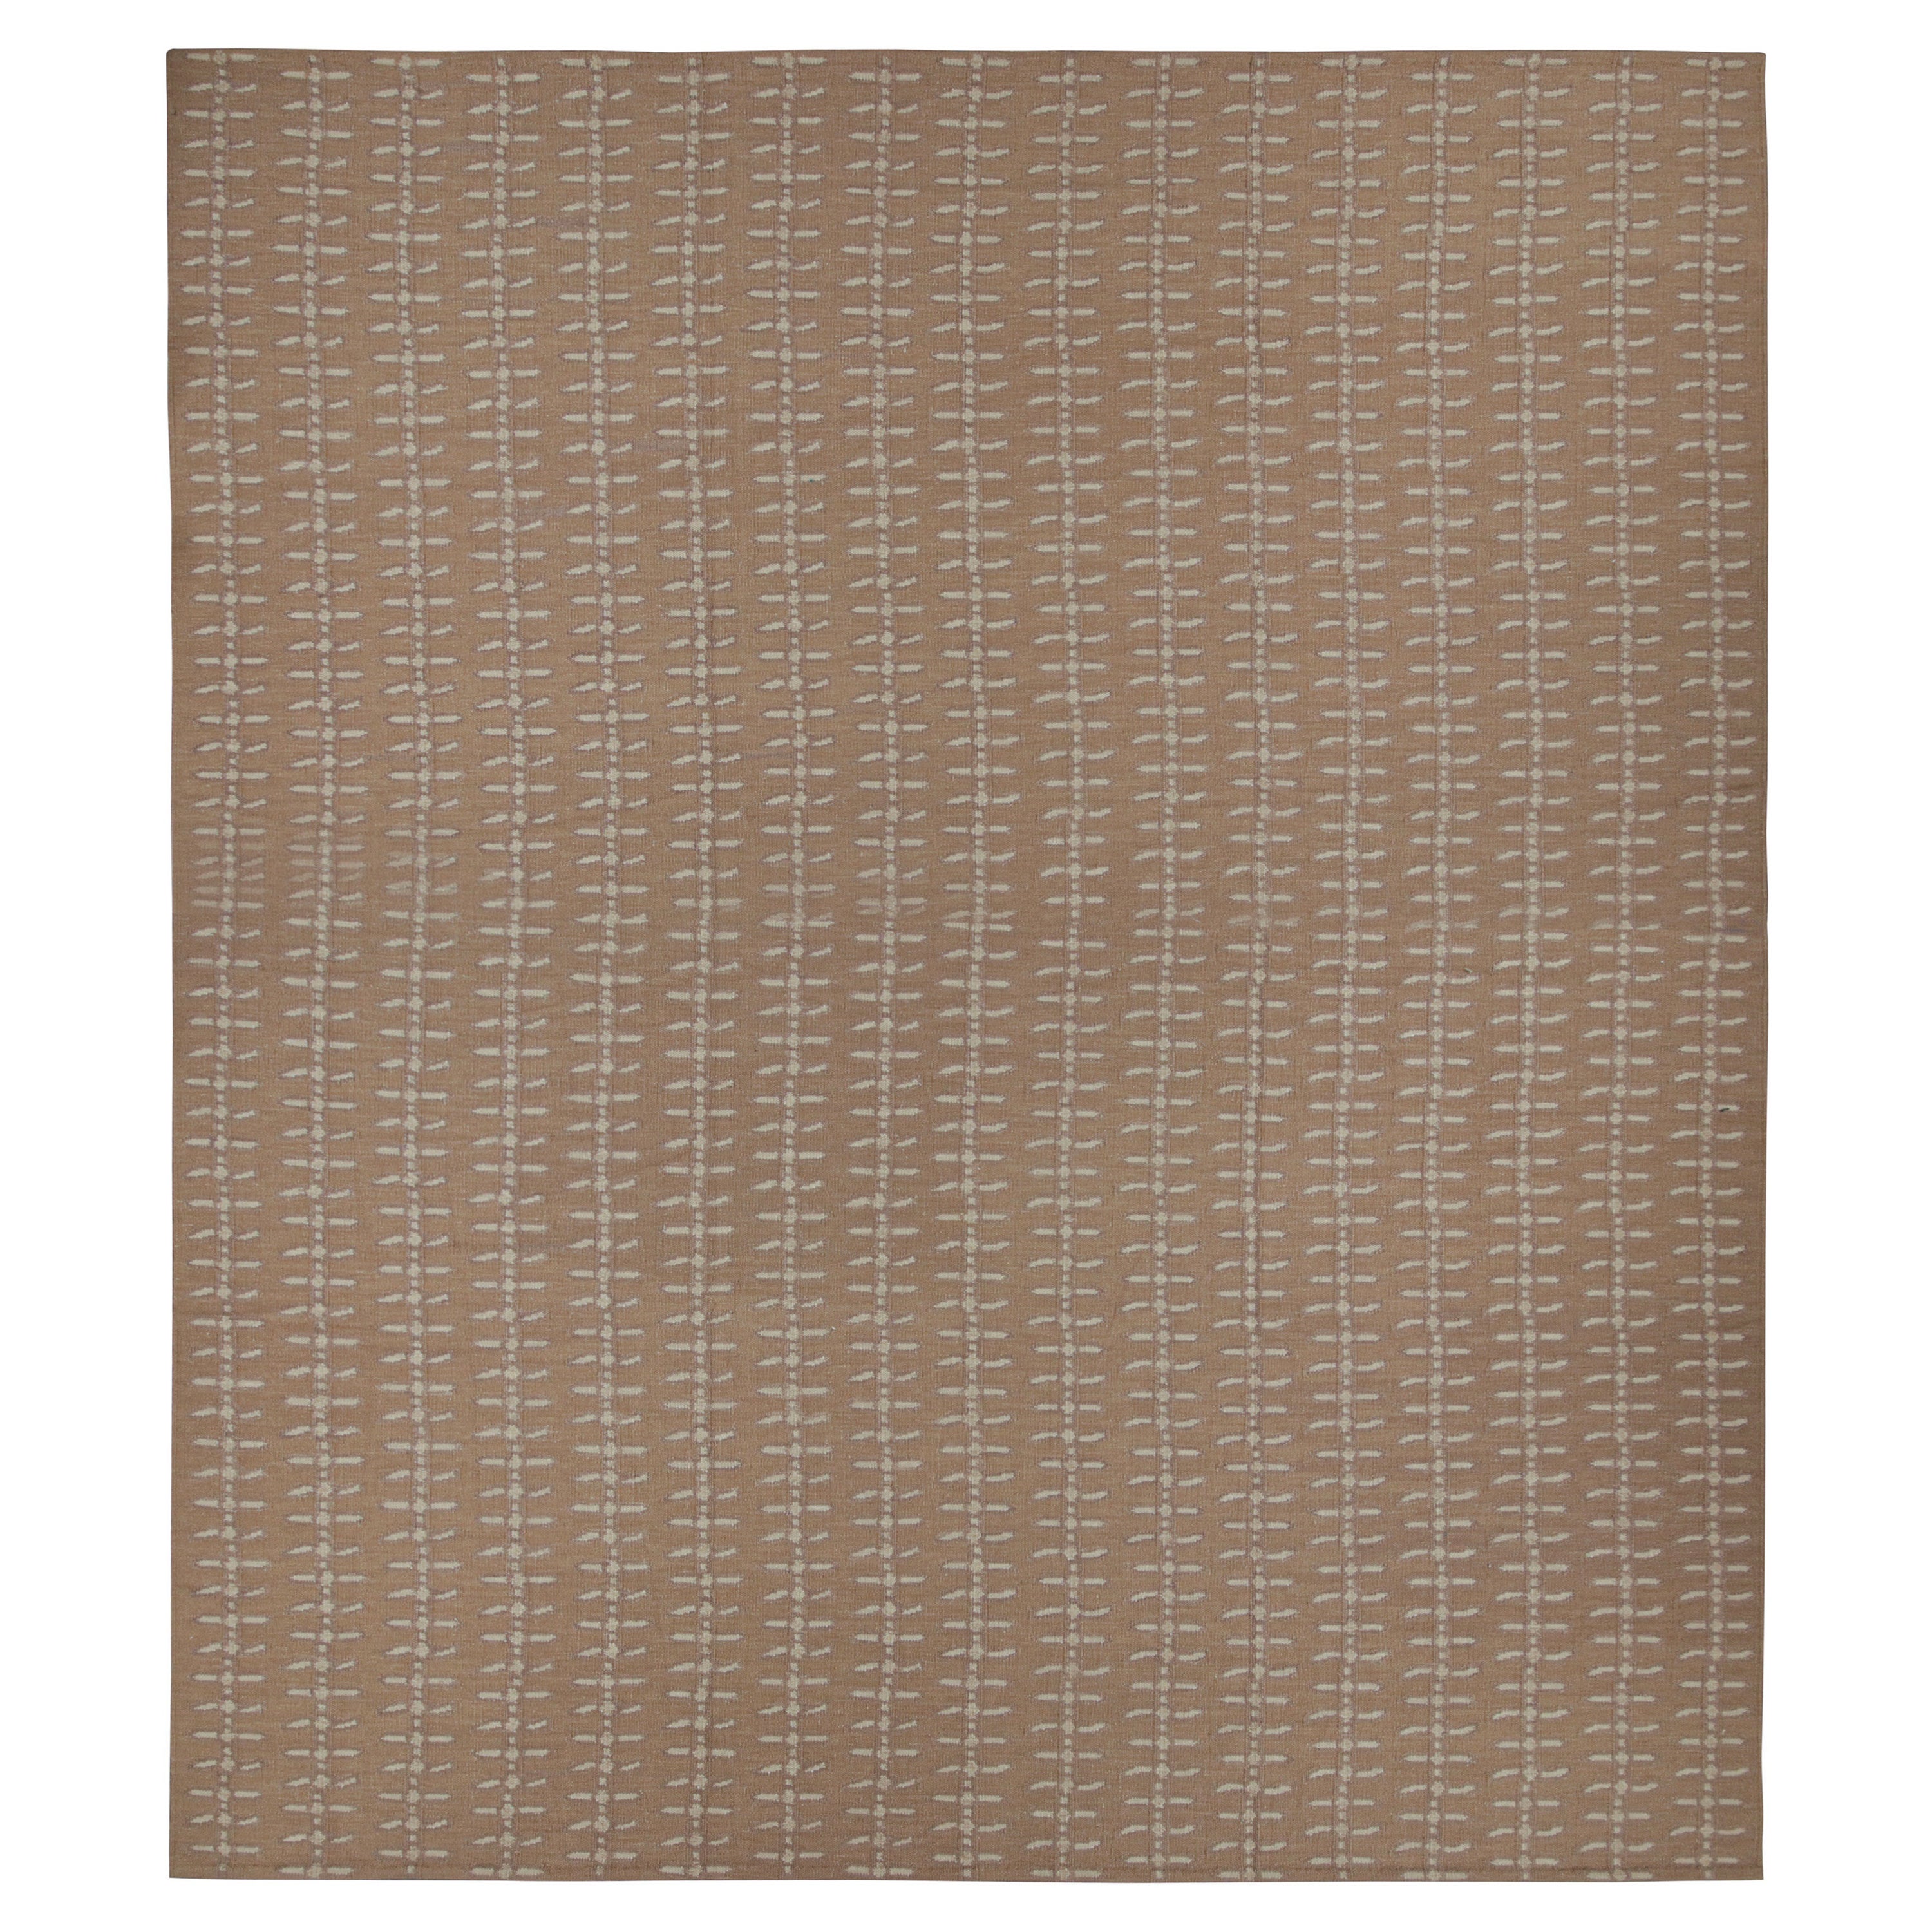 Rug & Kilim’s Oversized Scandinavian Style Rug in Beige-Brown and Floral Pattern